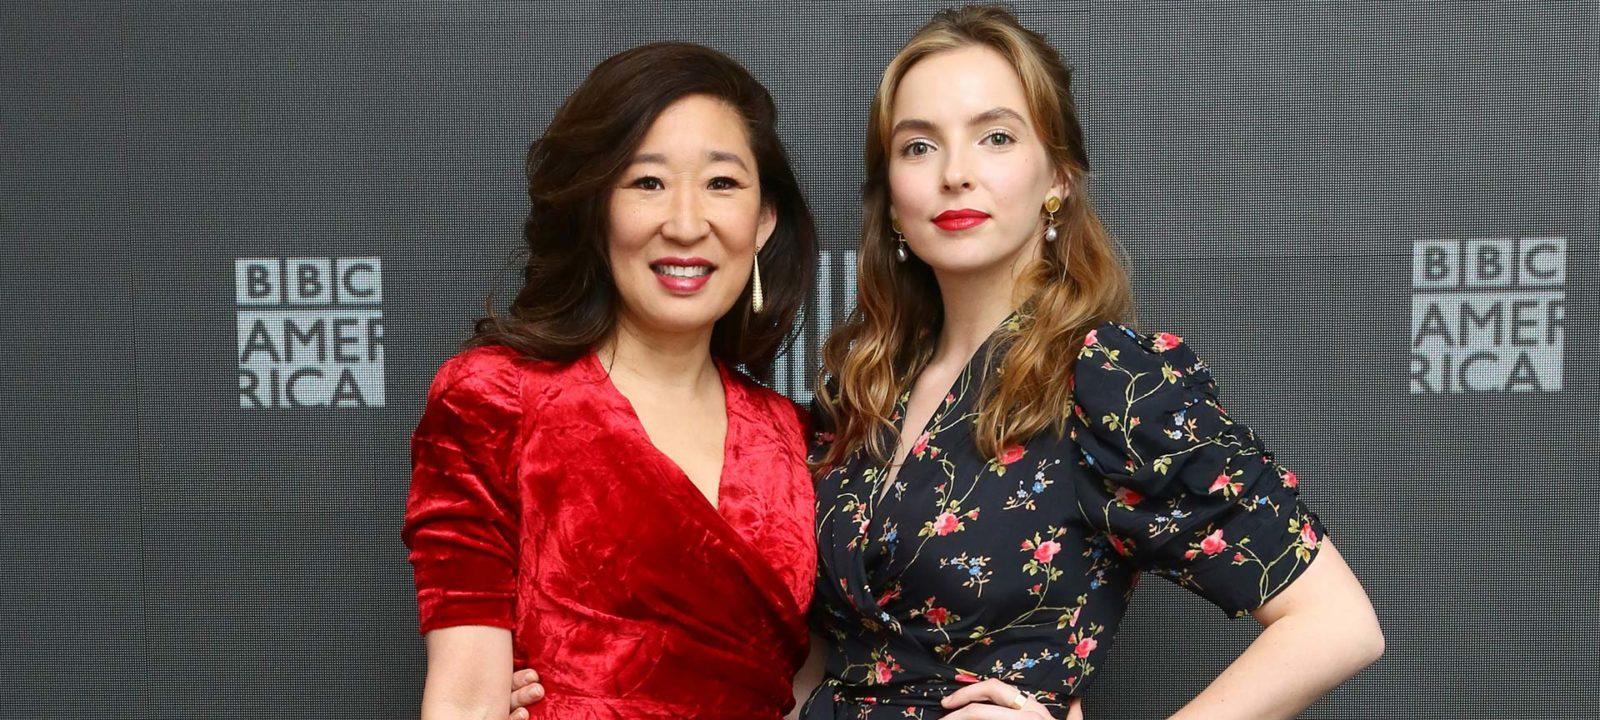 BBC America's 'Killing Eve' Renewed for a Second Season Ahead of Its